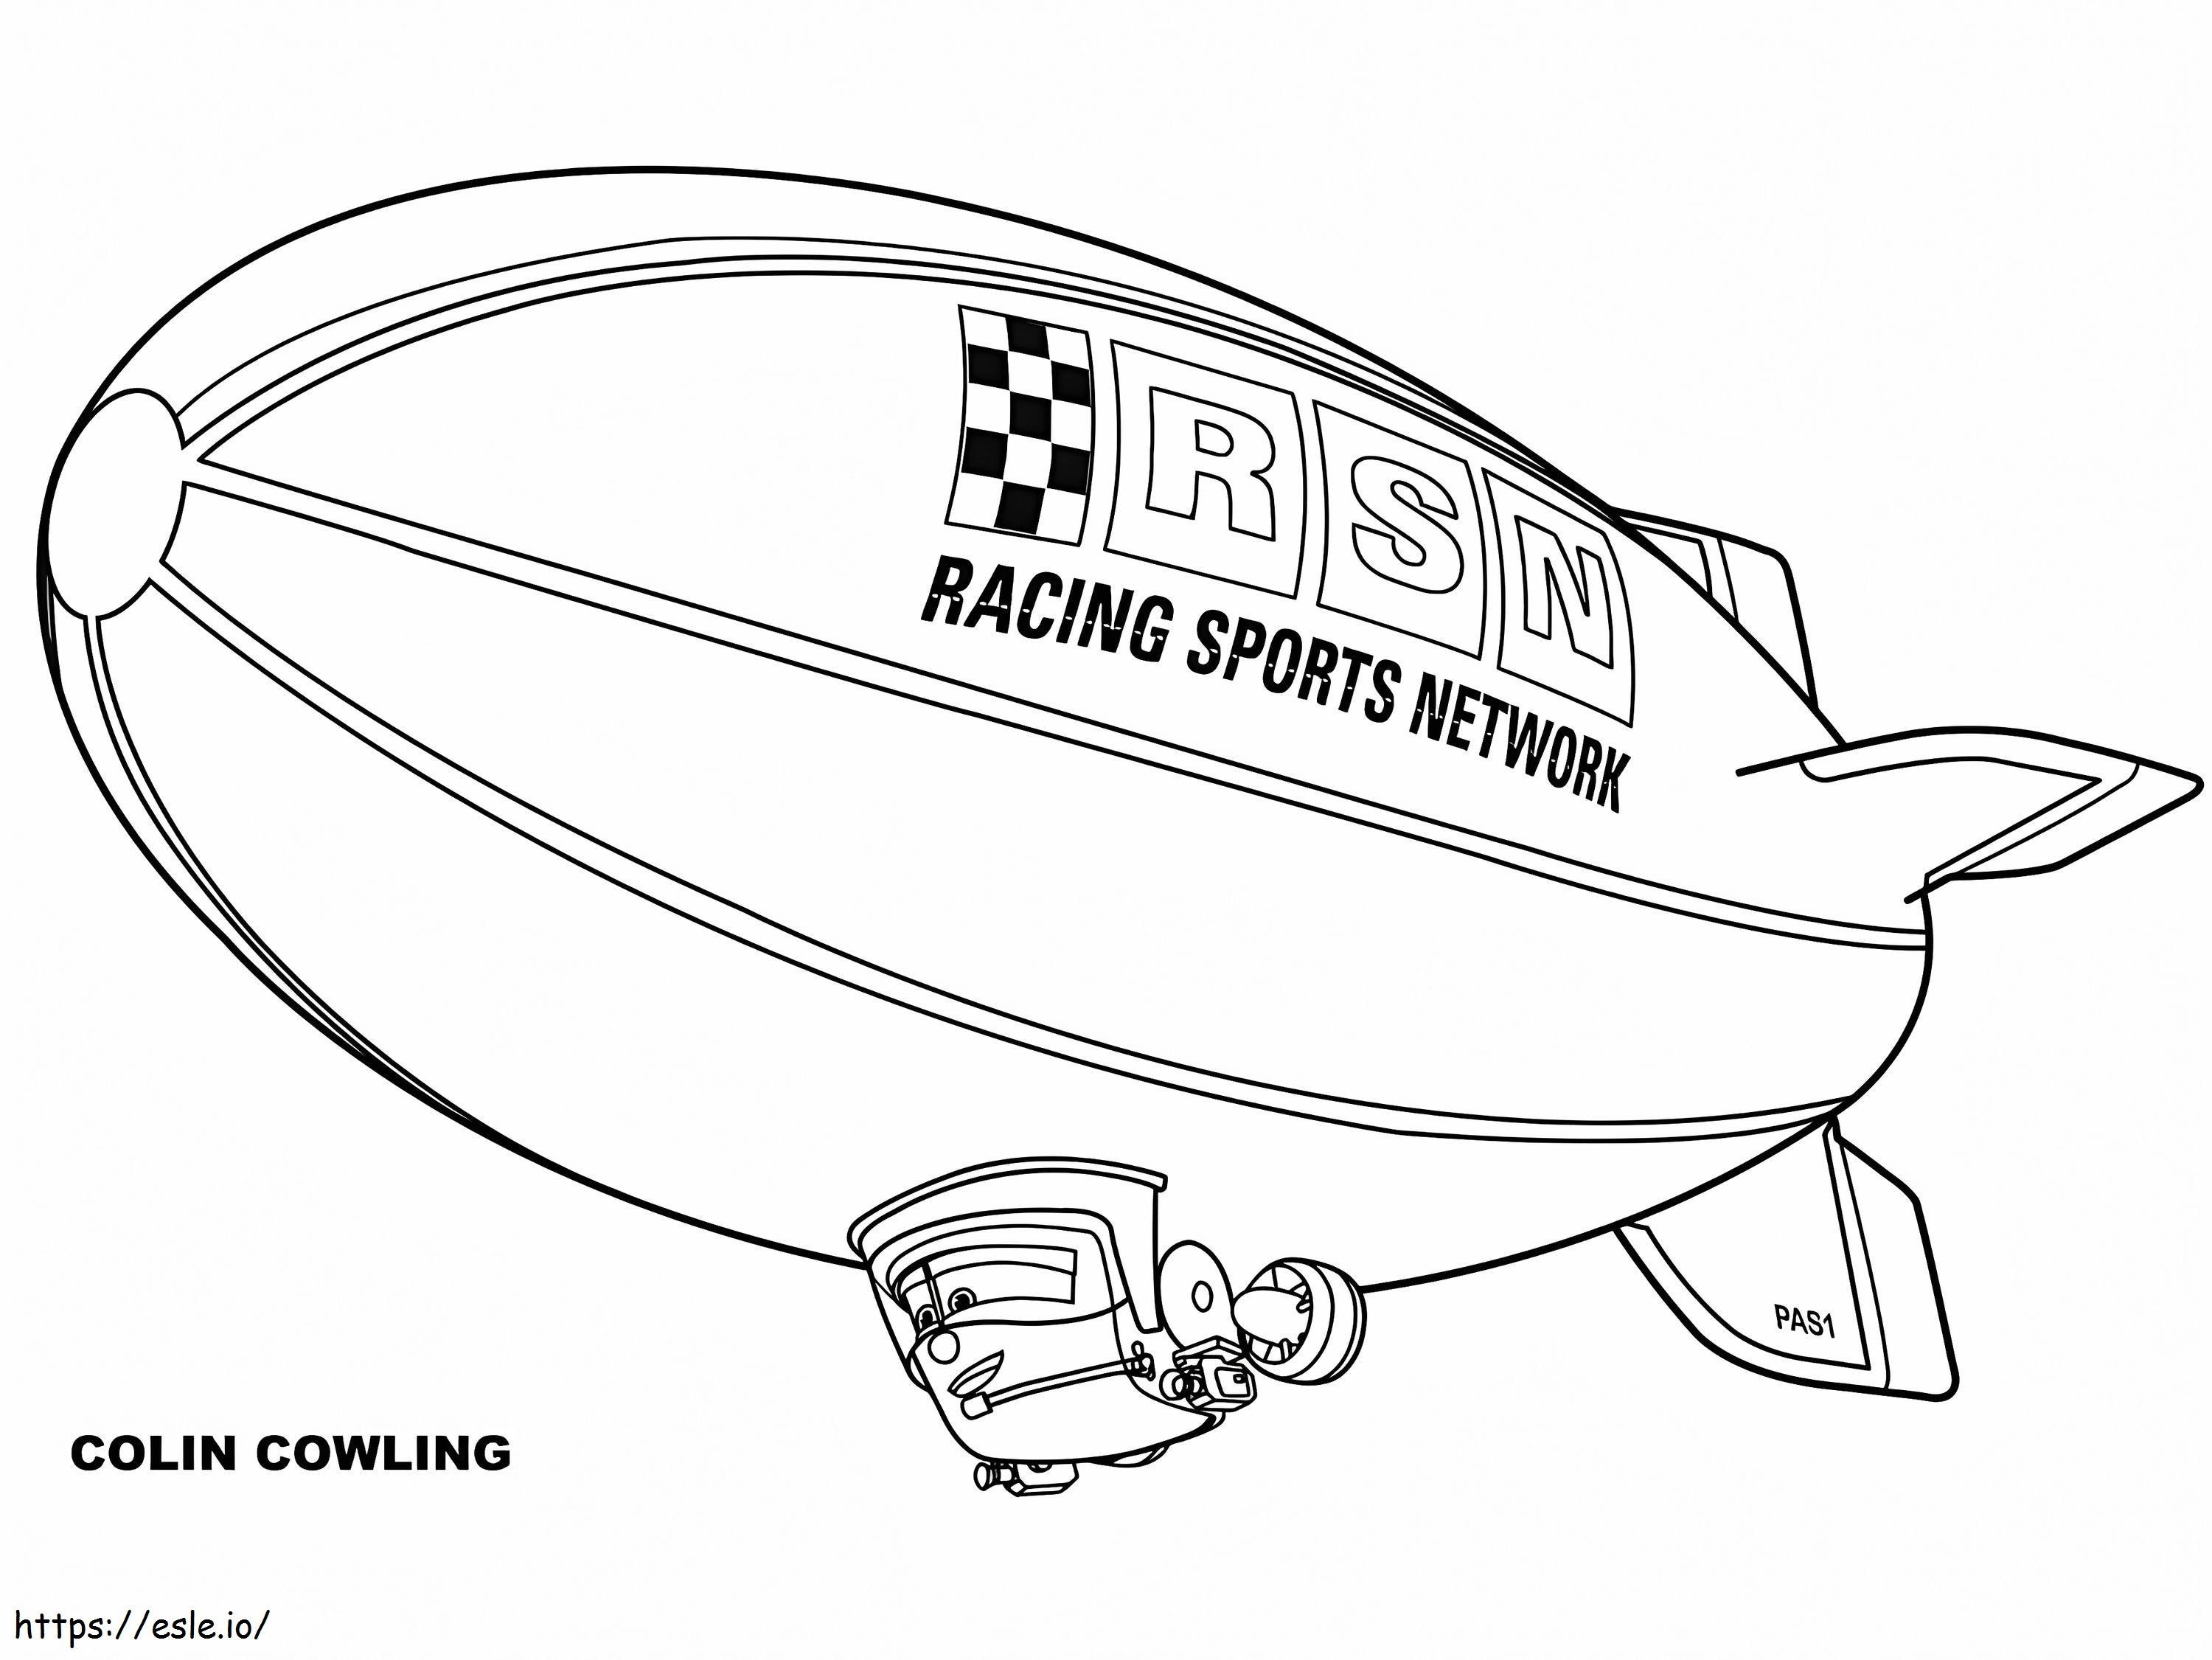 Blimp Colin Cowling coloring page